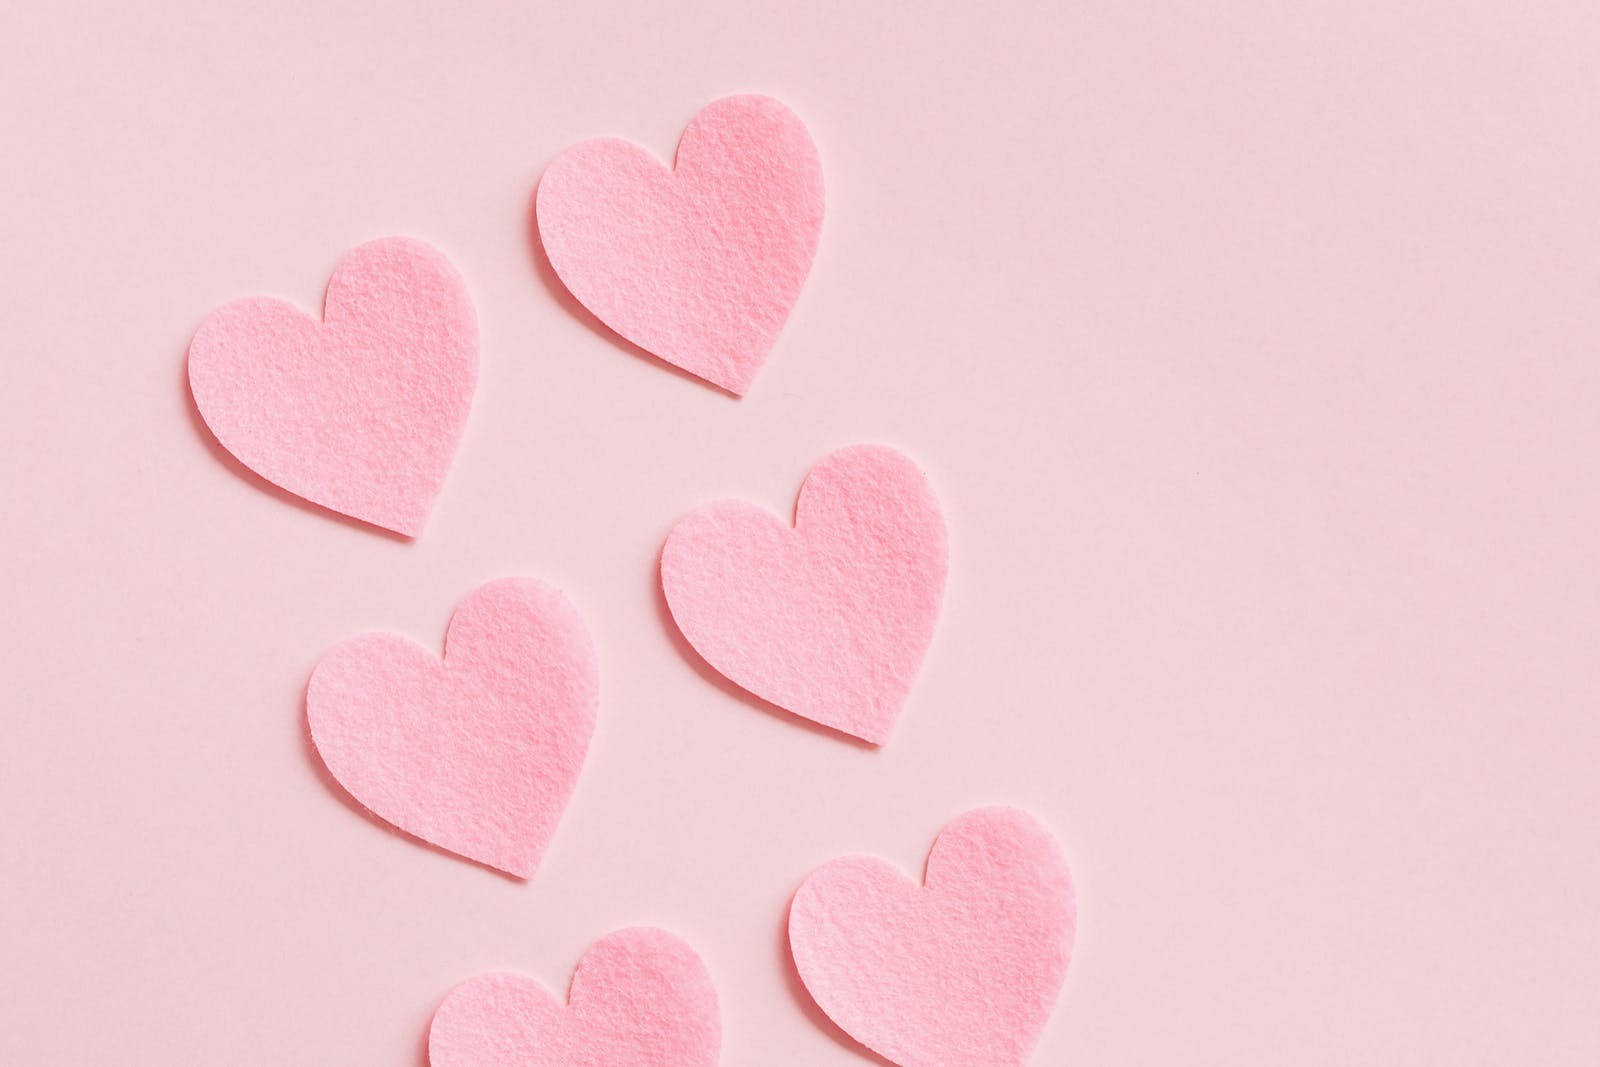 Pastel Pink Heart Cutouts In Pairs Wallpaper